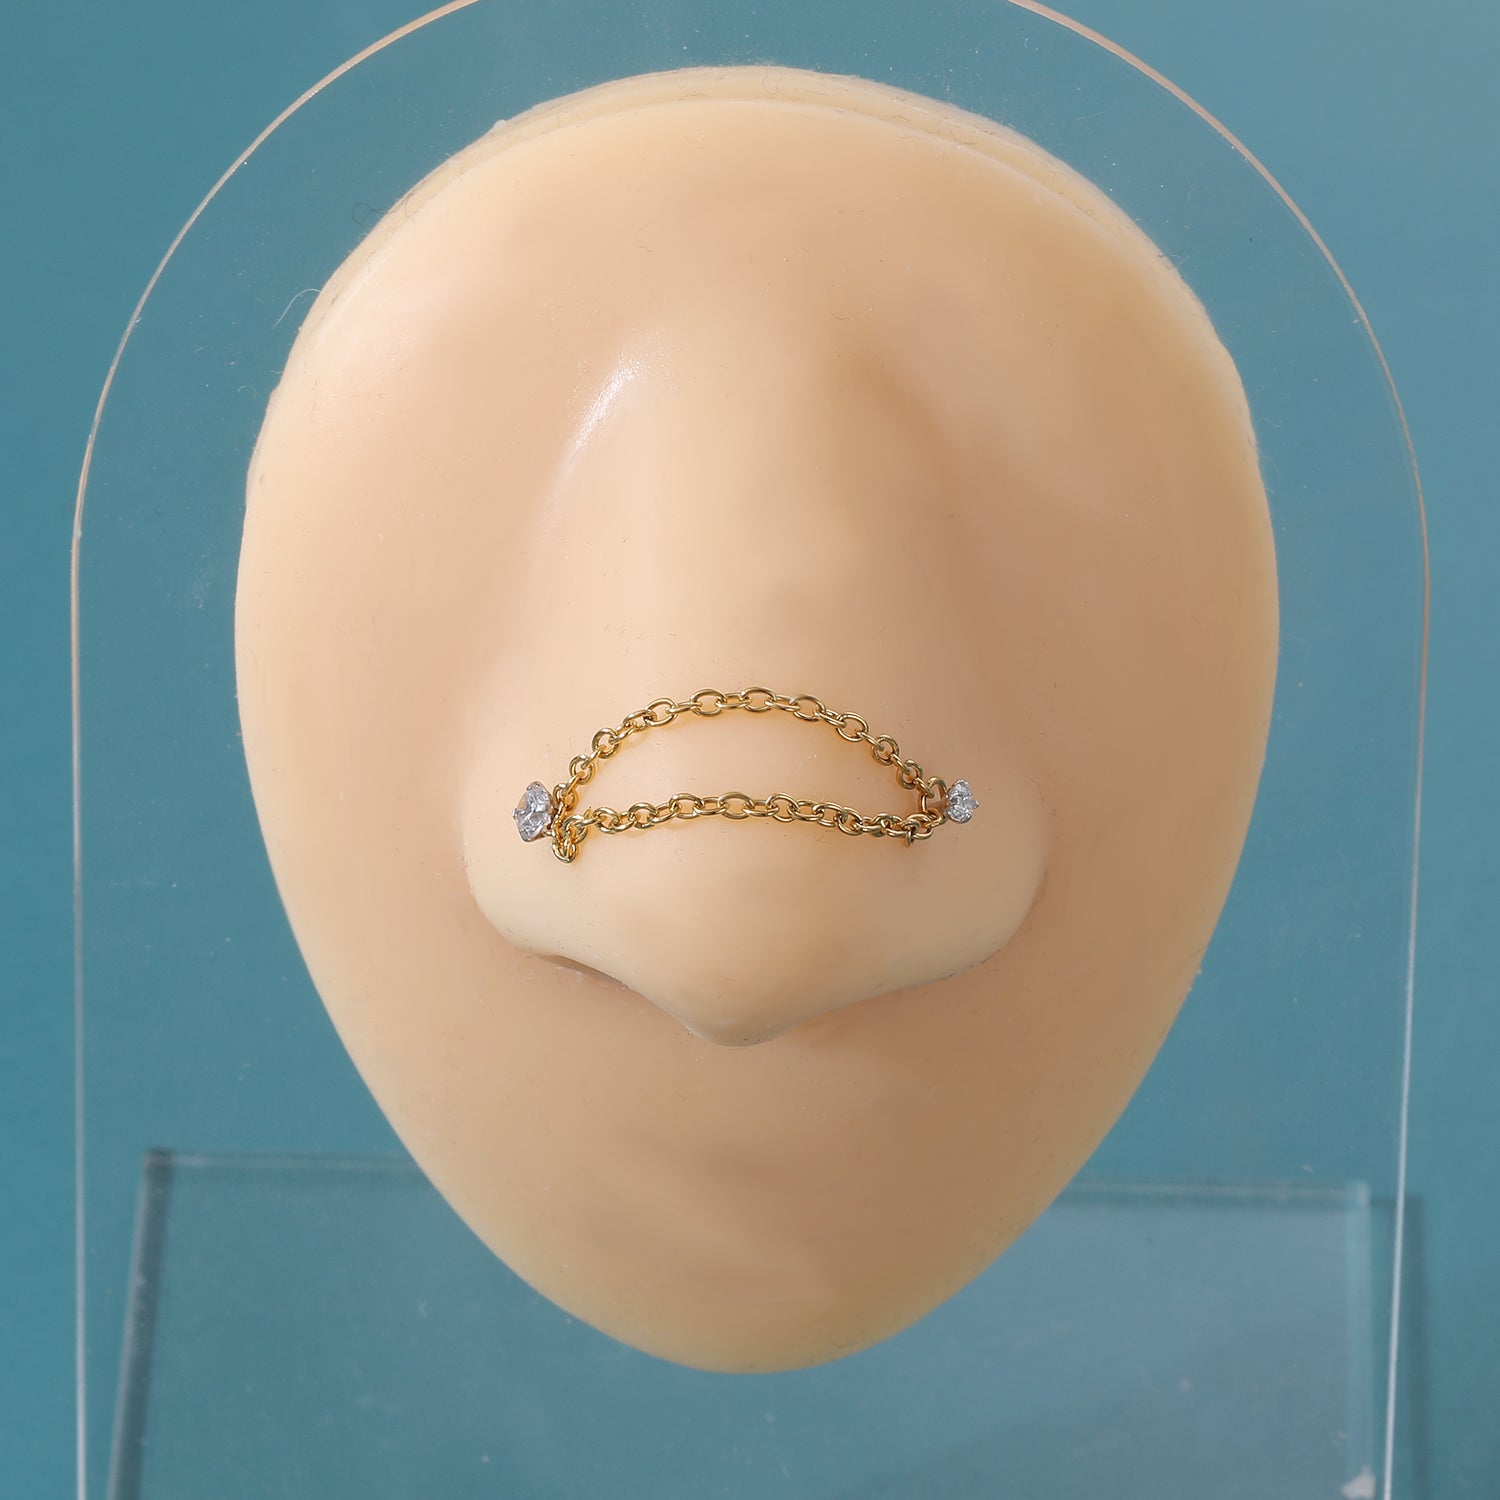 Buy Double Nose Chain & Cuff Set Nose Chain Nose Cuff No Piercing Nose to  Ear Chain Dangle Nose Ring Fake Nose Ring Online in India - Etsy